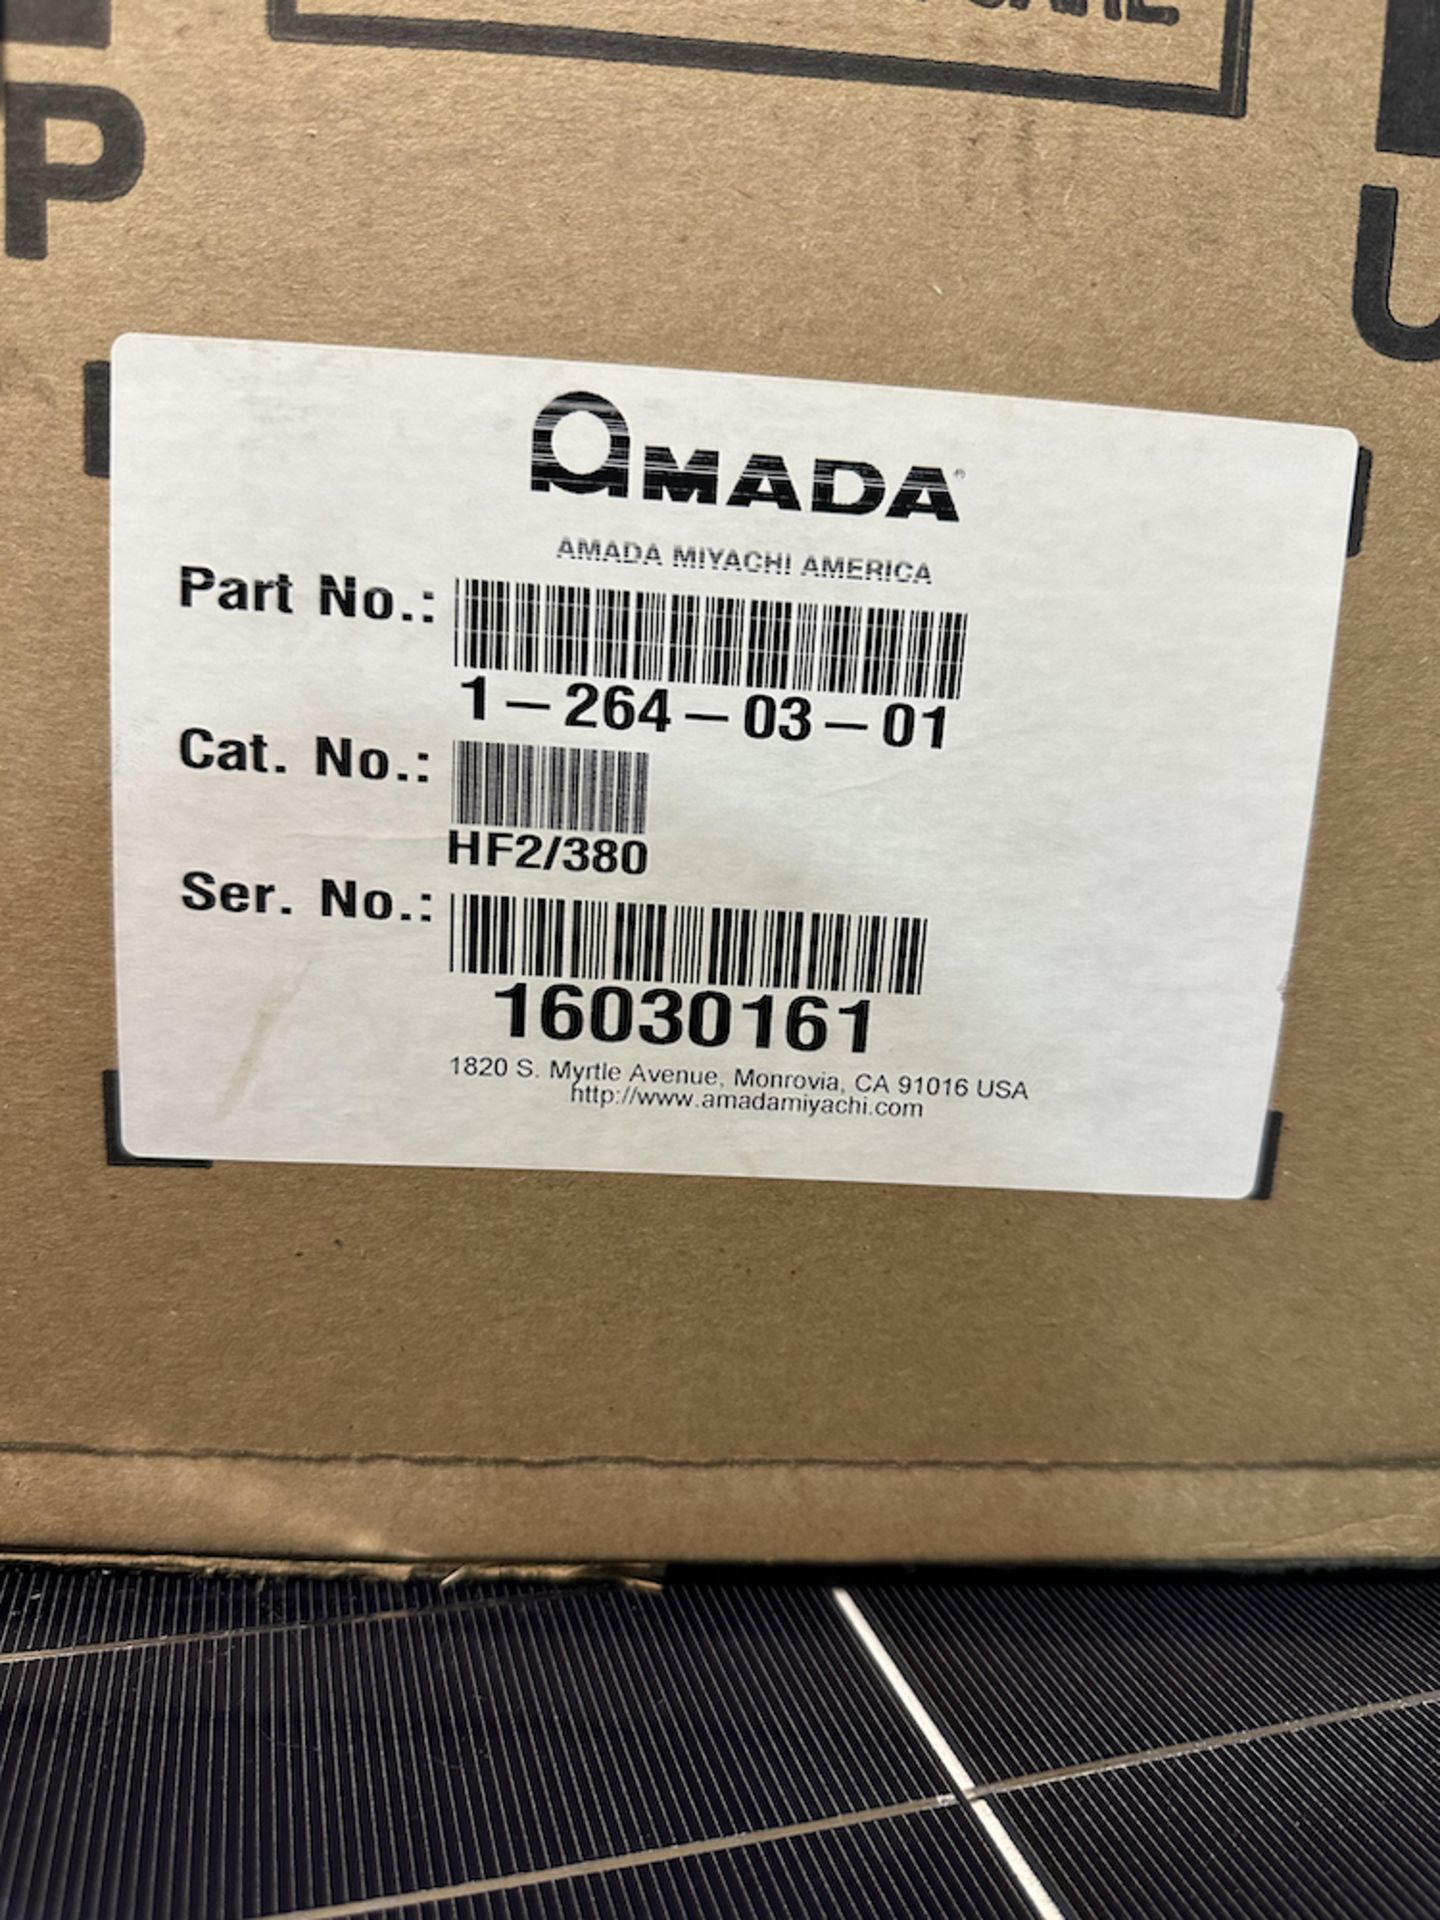 NEW IN BOX - AMADA MIYACHI HF2/380 HIGH FREQUENCY INVERTER WELDING CONTROL - Image 7 of 8